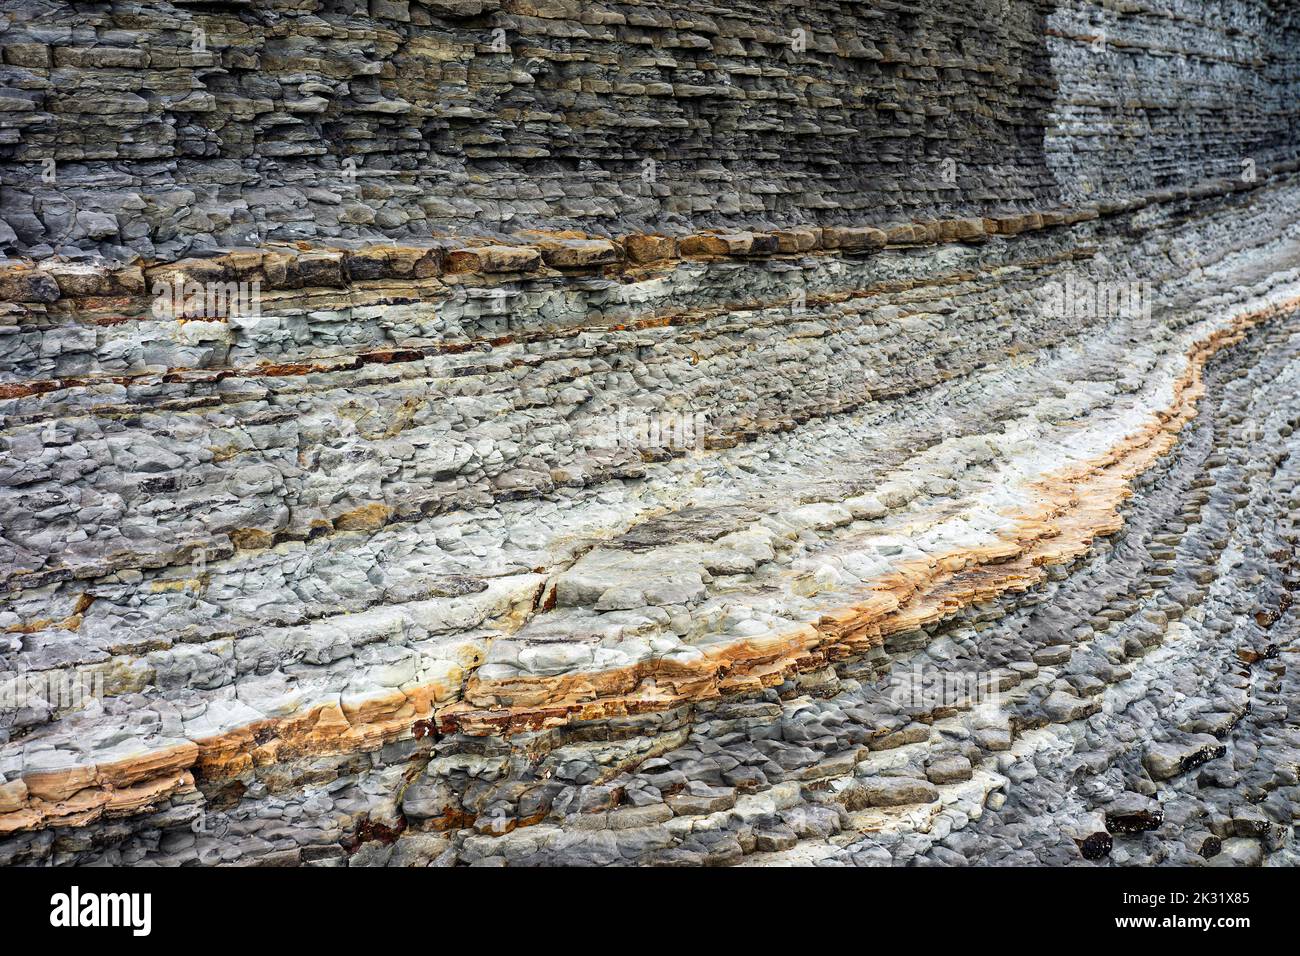 Geological rock layers exposed over millions of years. Stock Photo